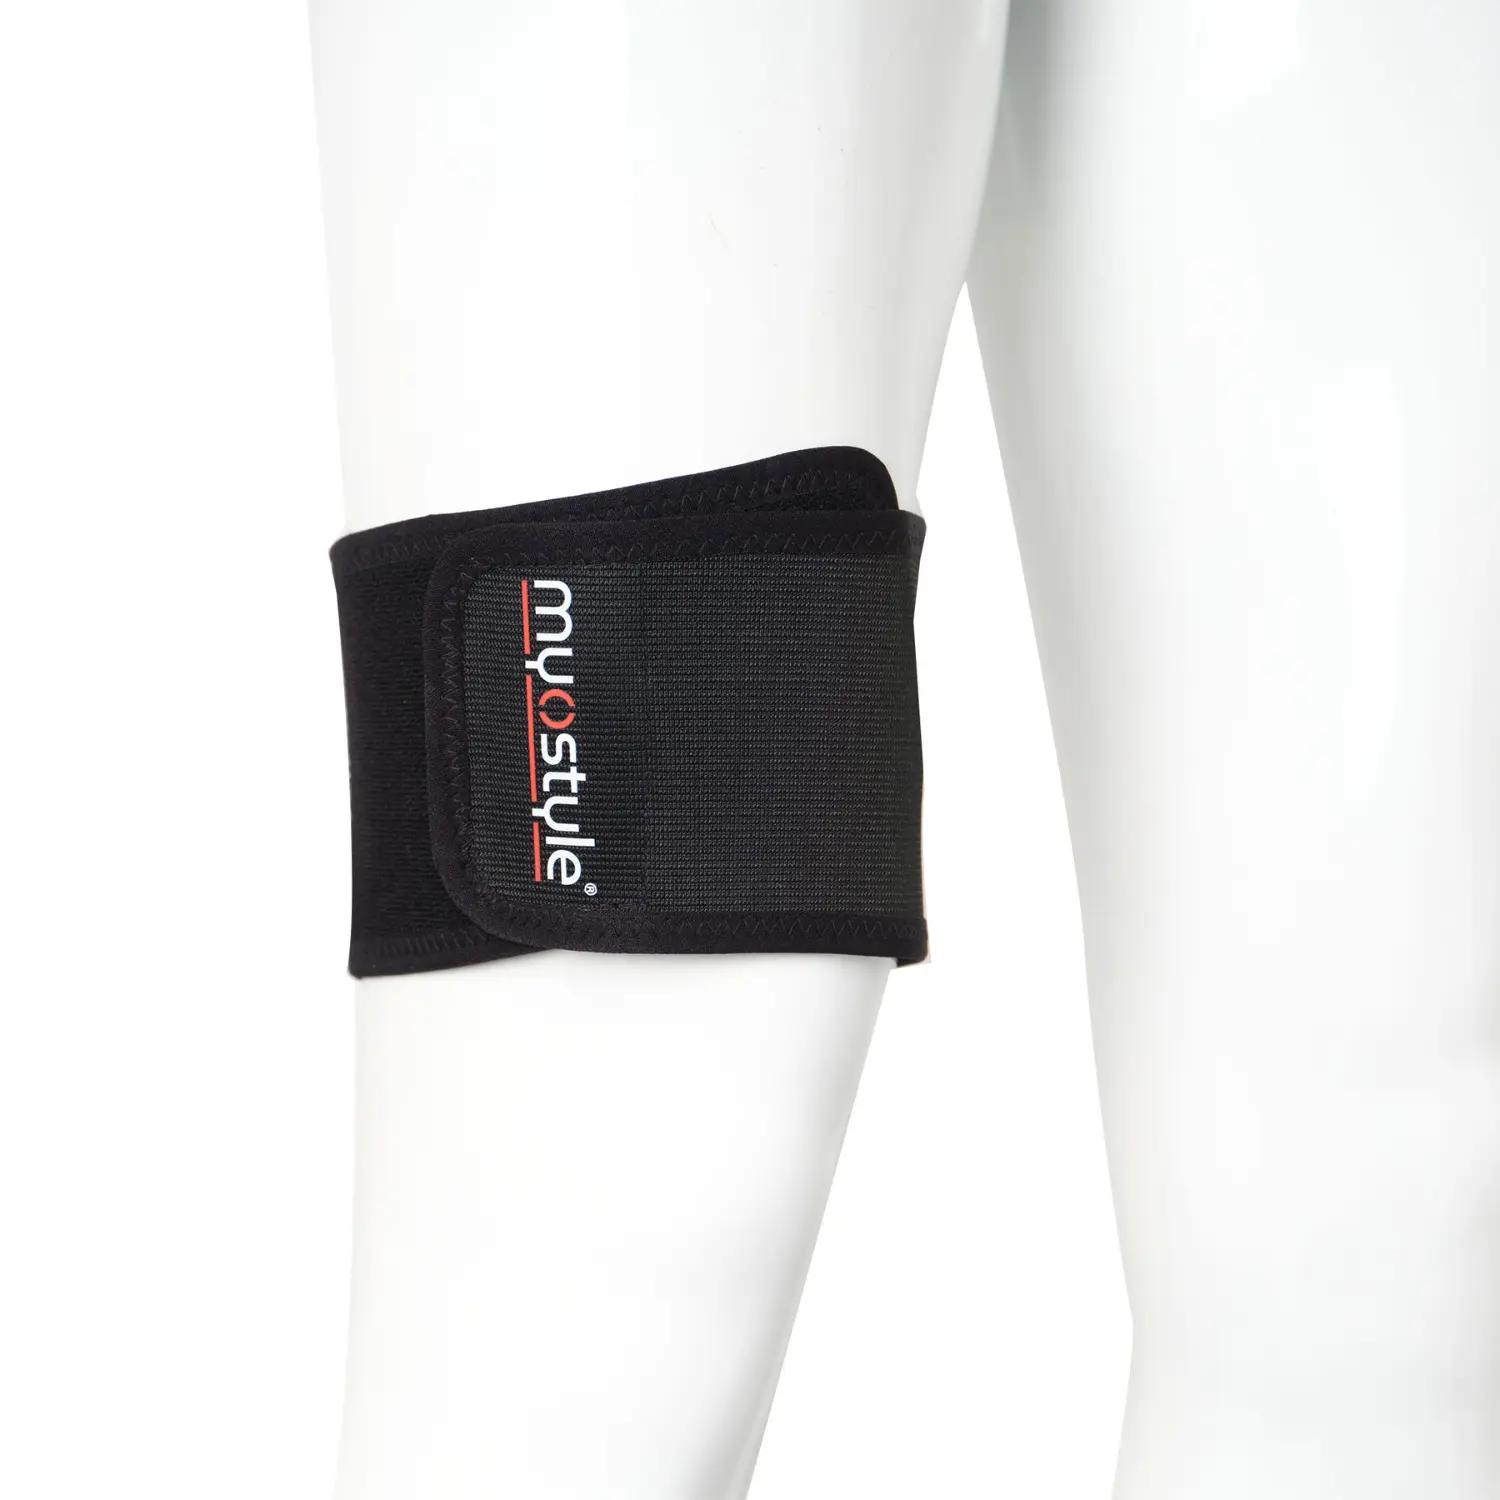 Arm Cuffs for Your myostyle EMS Suit